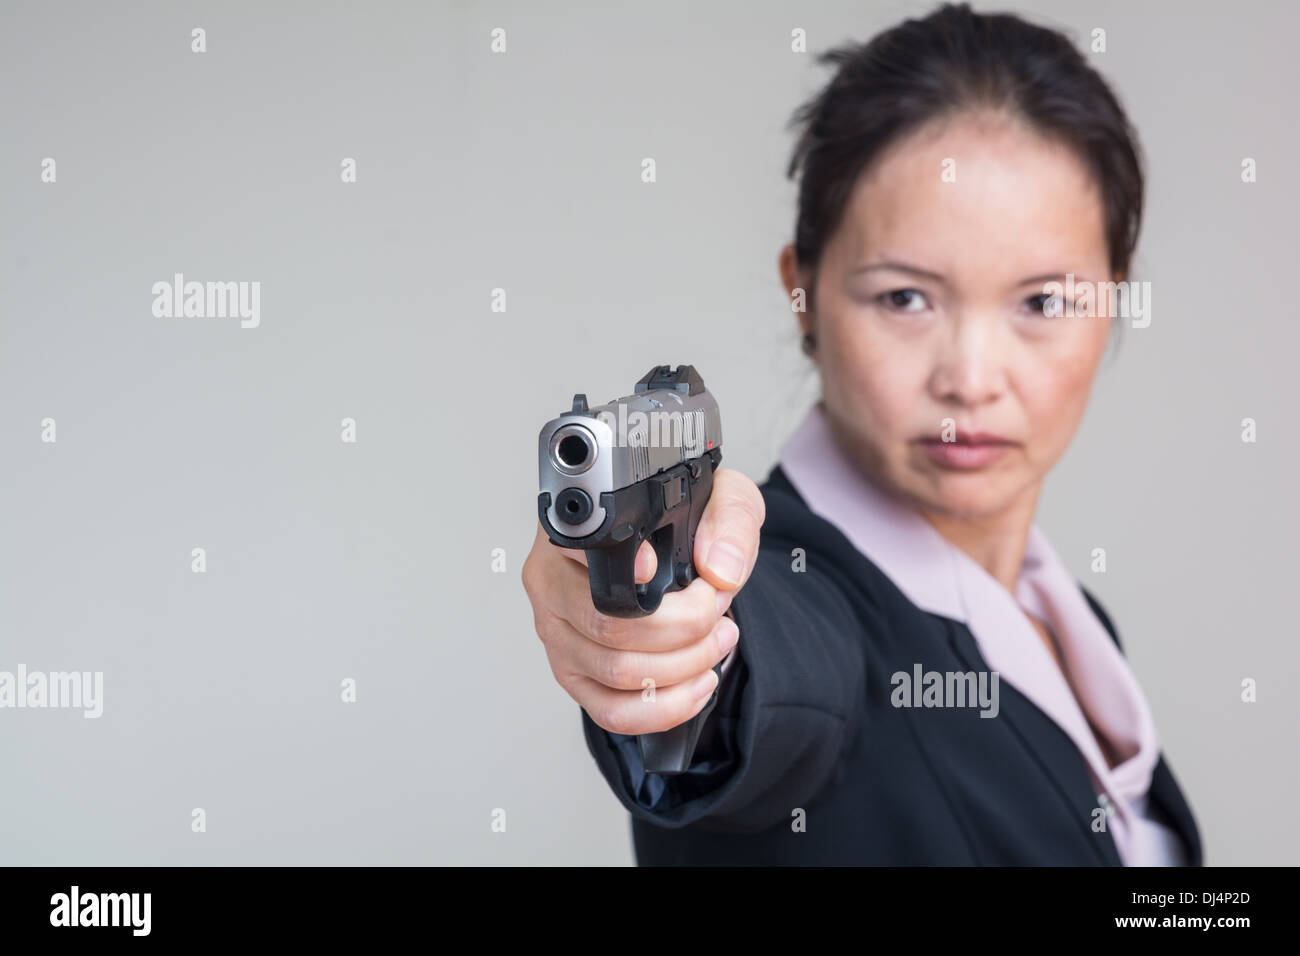 Close up portrait of woman in business suit aiming a hand gun Stock Photo